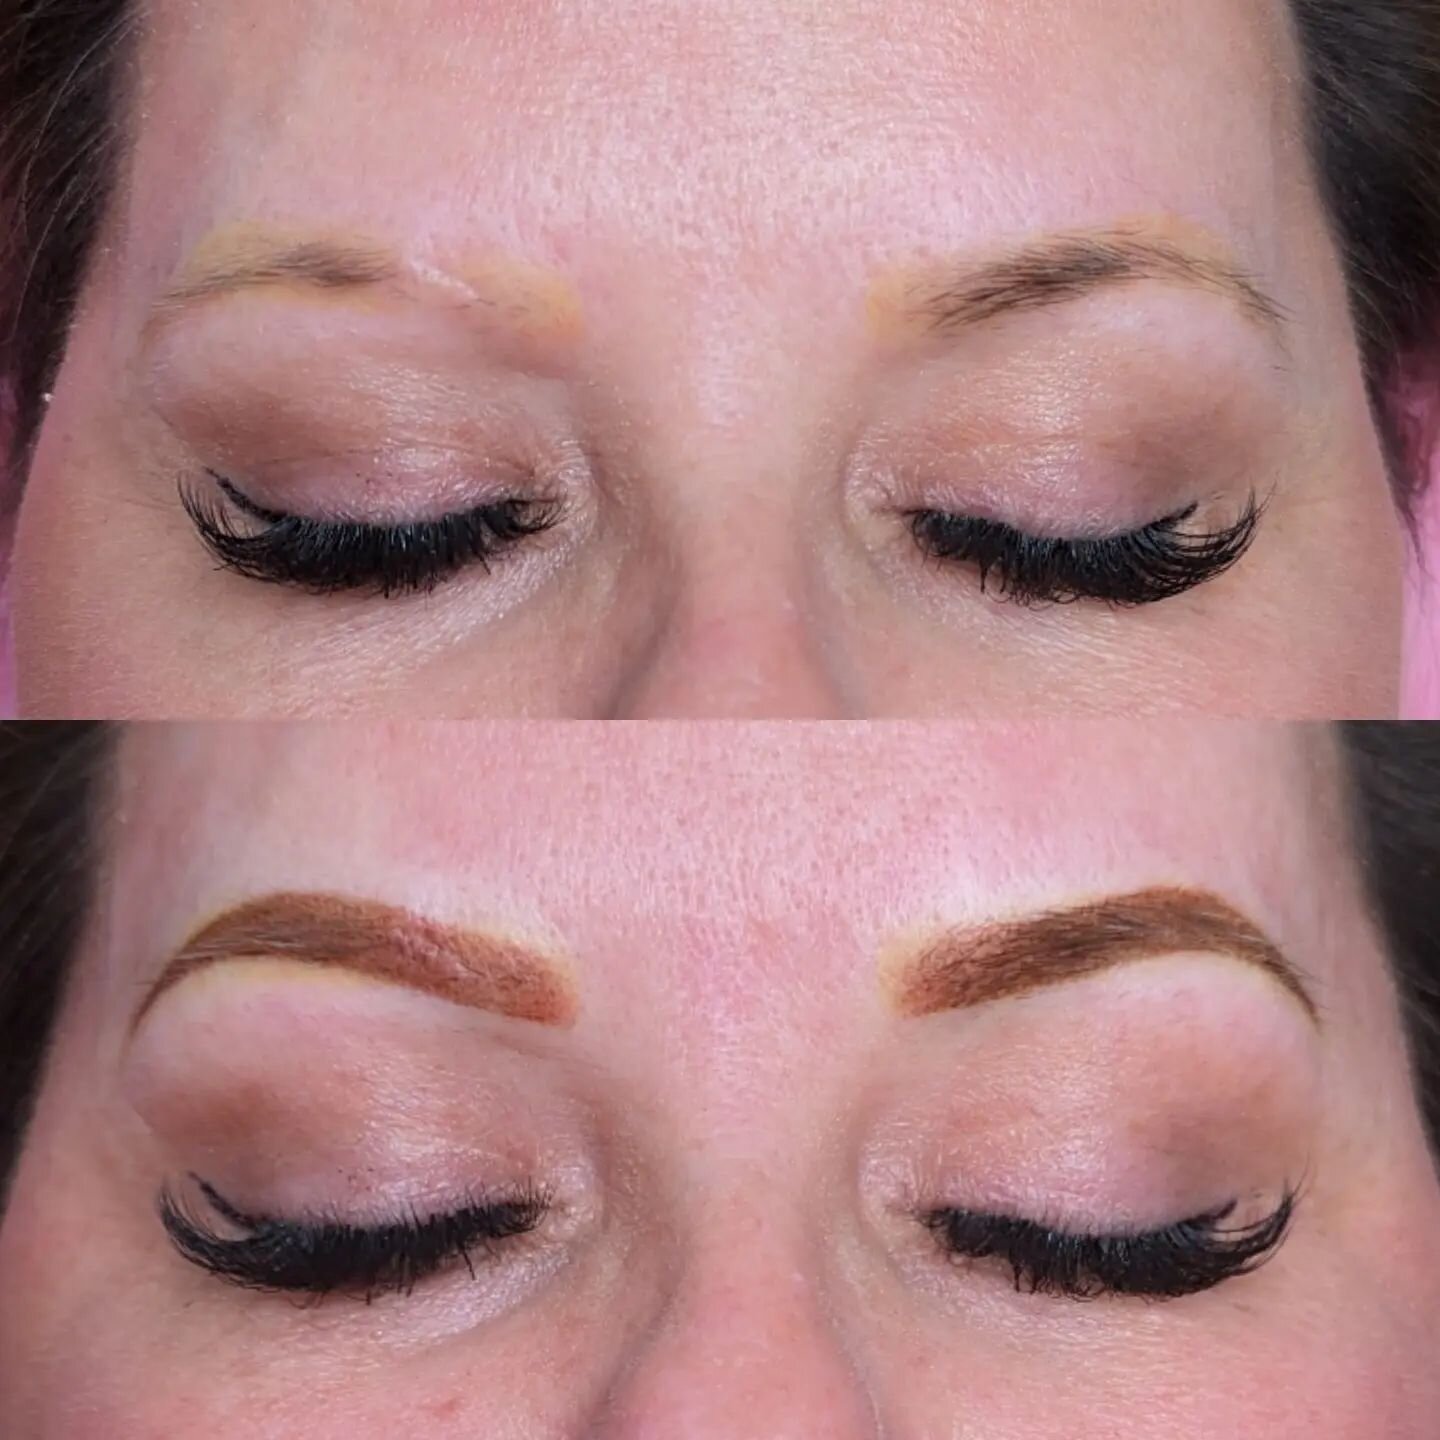 This was a fun challenge (for me)! Here's the low down on these brows 👇

This wonderful lady came to me wanting a colorboost, but after receiving her pics of the previous work from a different technician, I recommended laser removal to get the old i